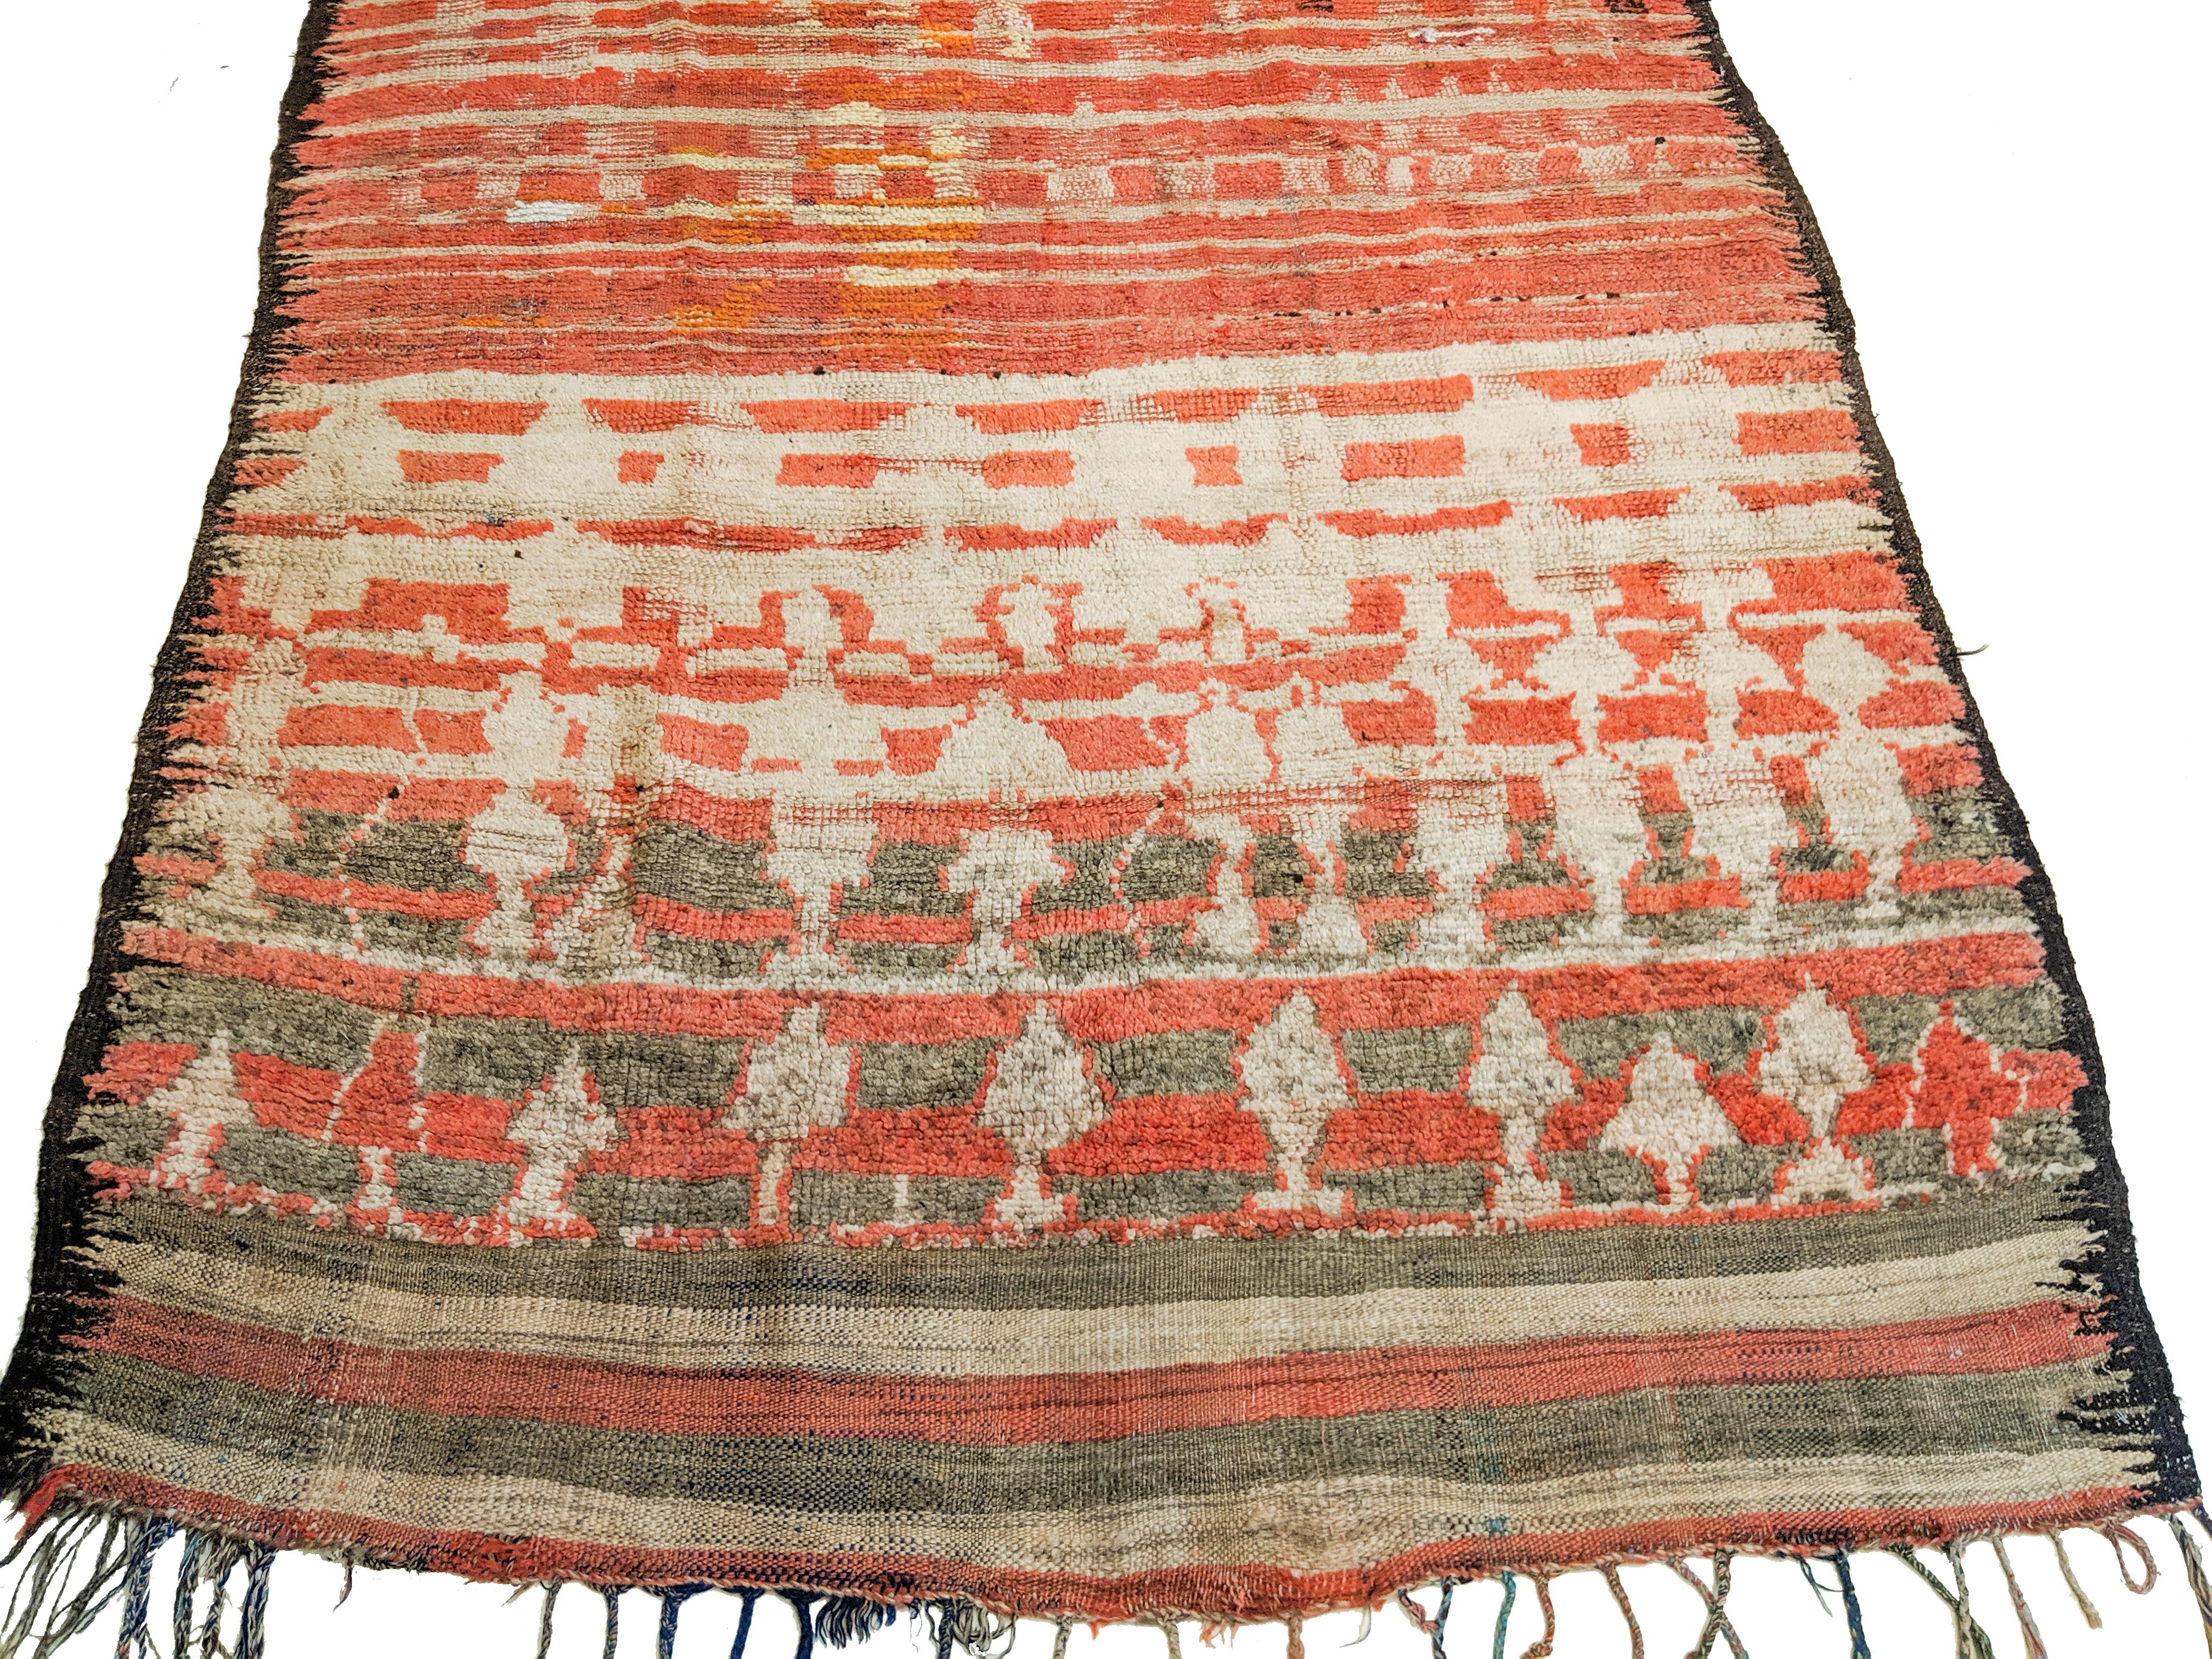 One of the oldest Berber rugs I have personally ever handled, woven in mixed technique with the upper section in flat-weave embellished with some knotted pile and the lower portion completely knotted. The abstract pattern is characteristic of the